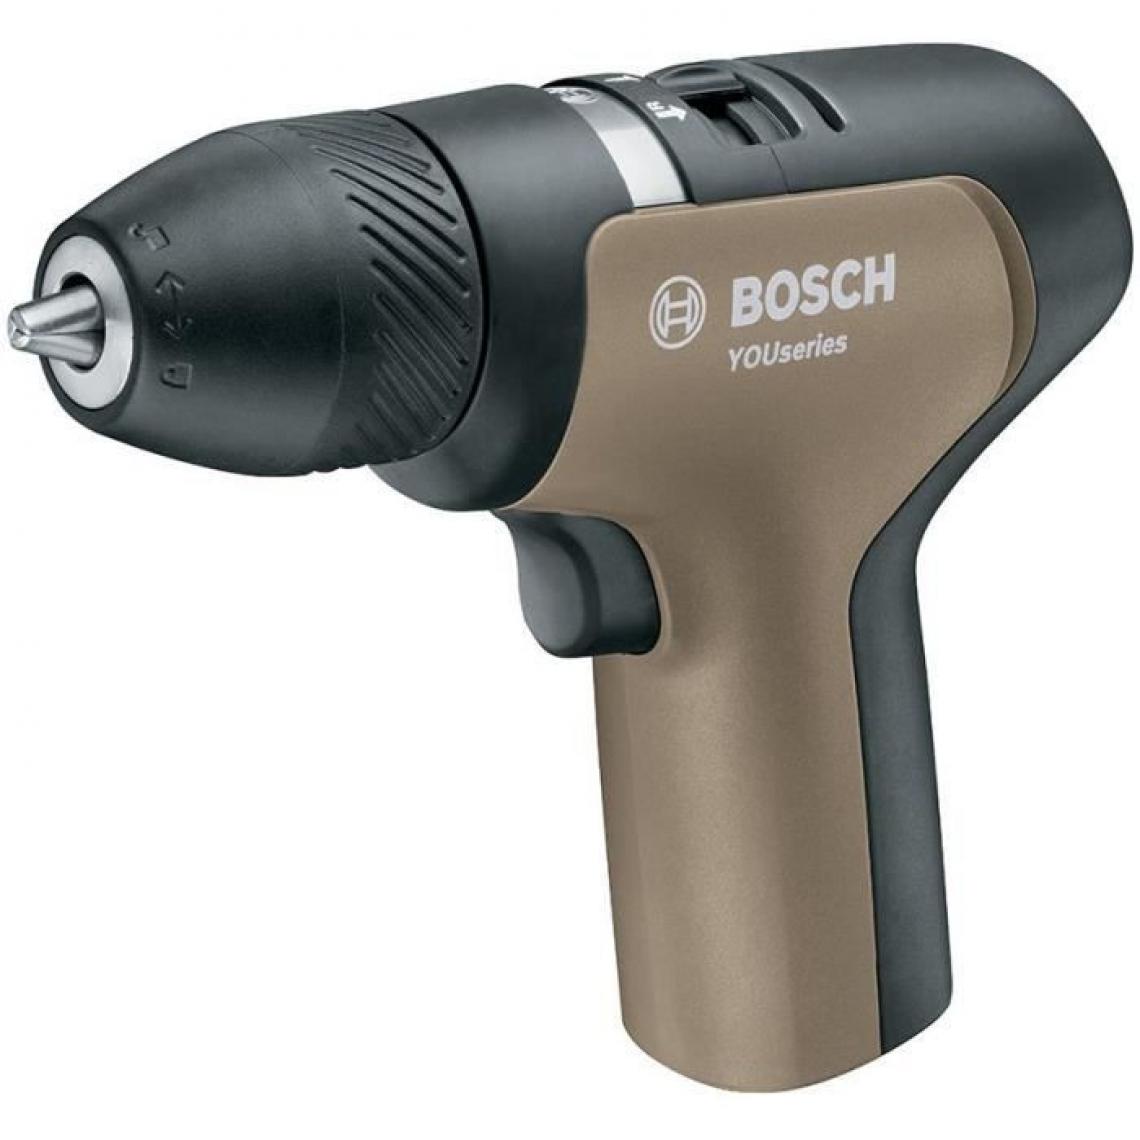 Bosch - YOUseries Perceuse BT - Perceuses, visseuses filaires